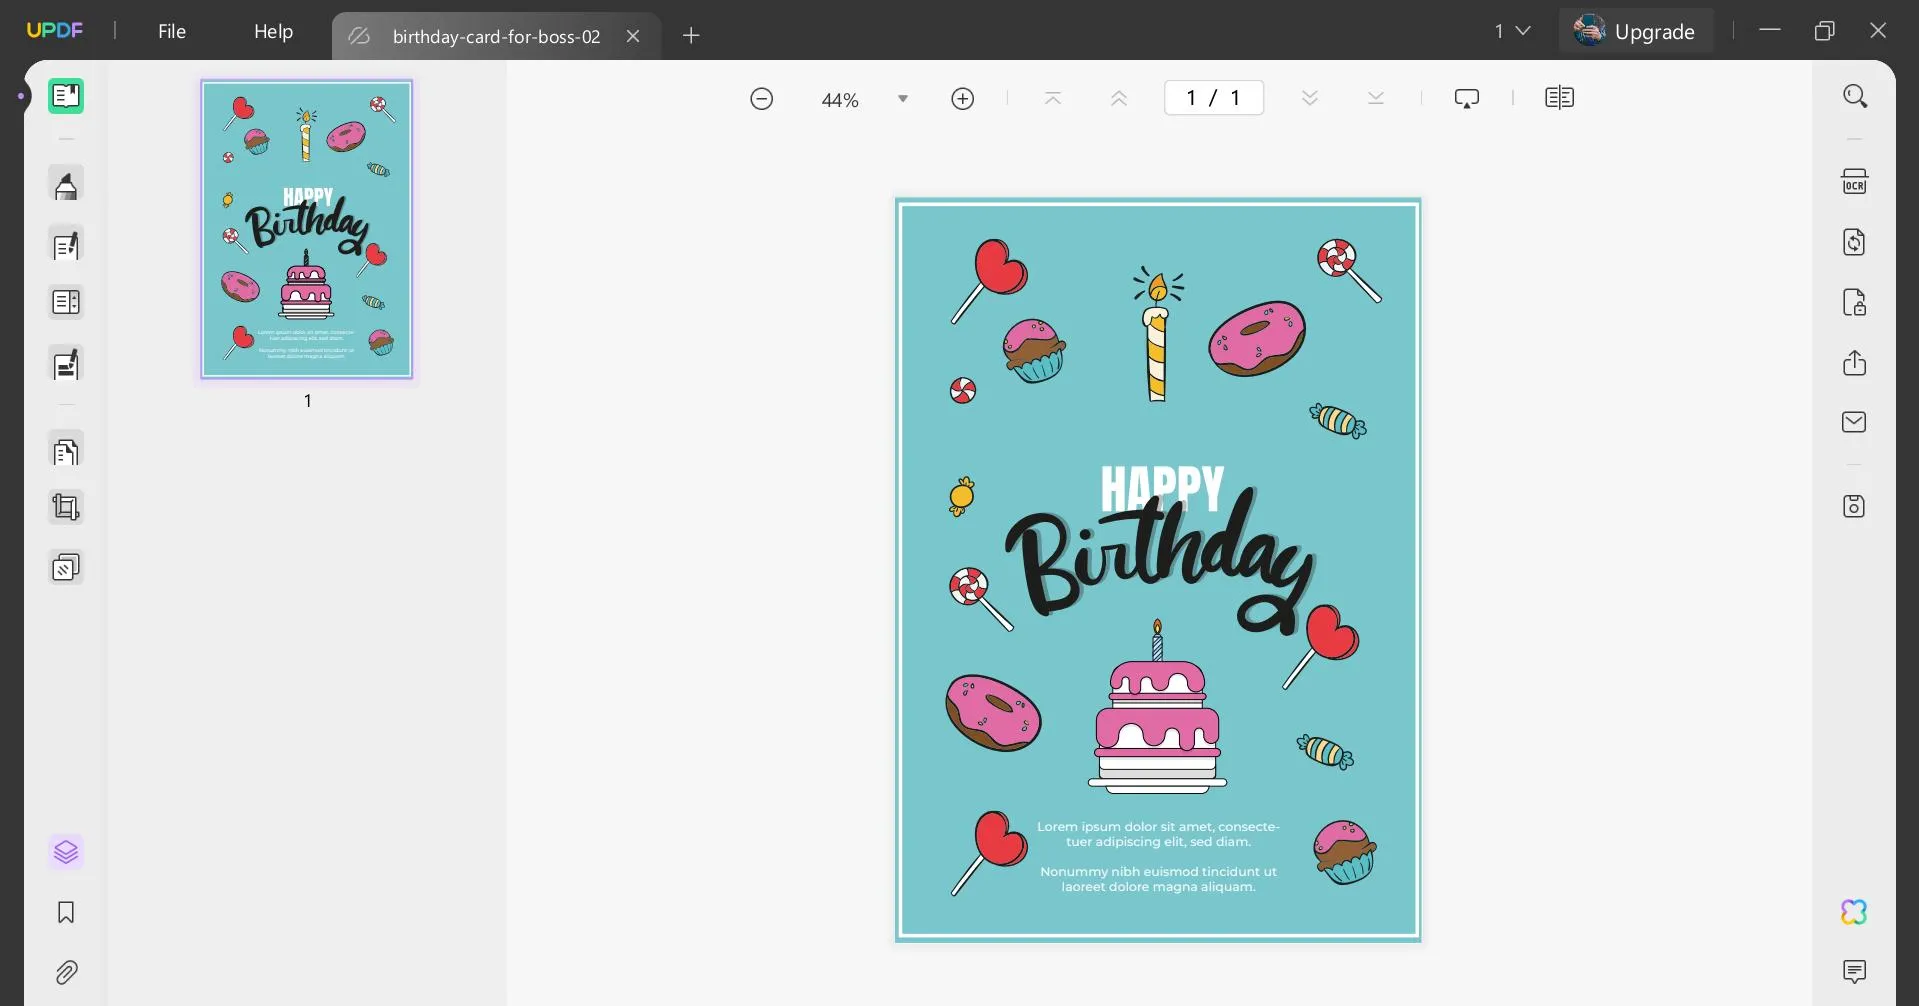 first birthday wishes open birthday card template with updf